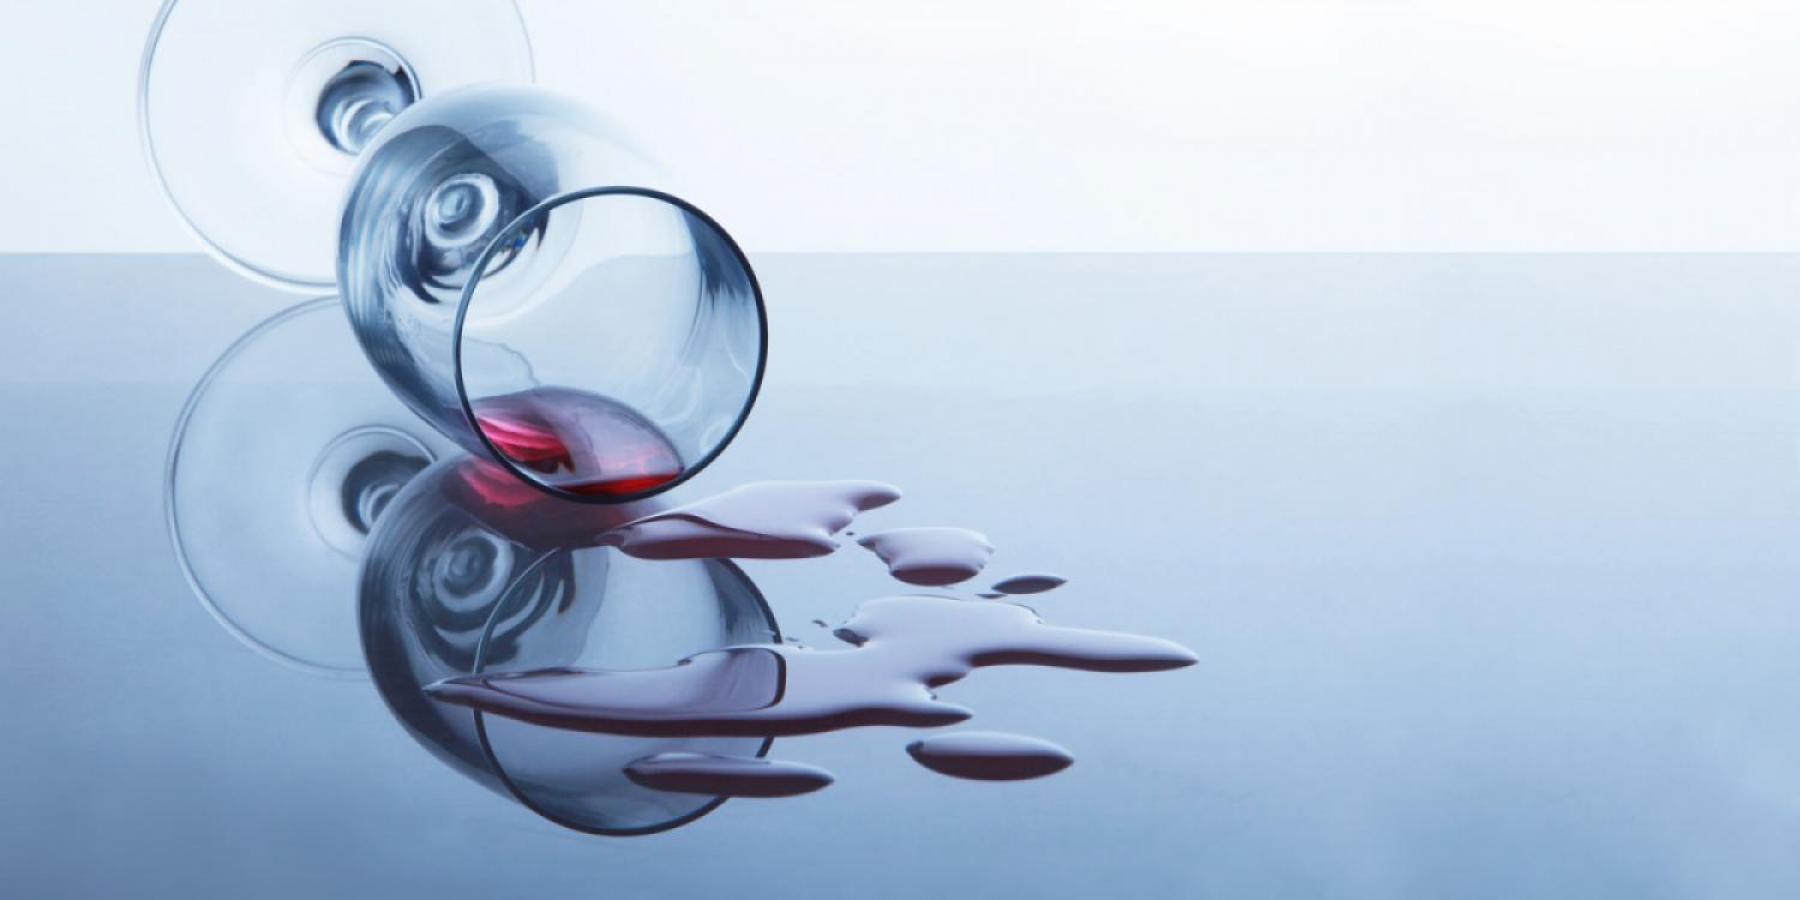 Spilled wine glass